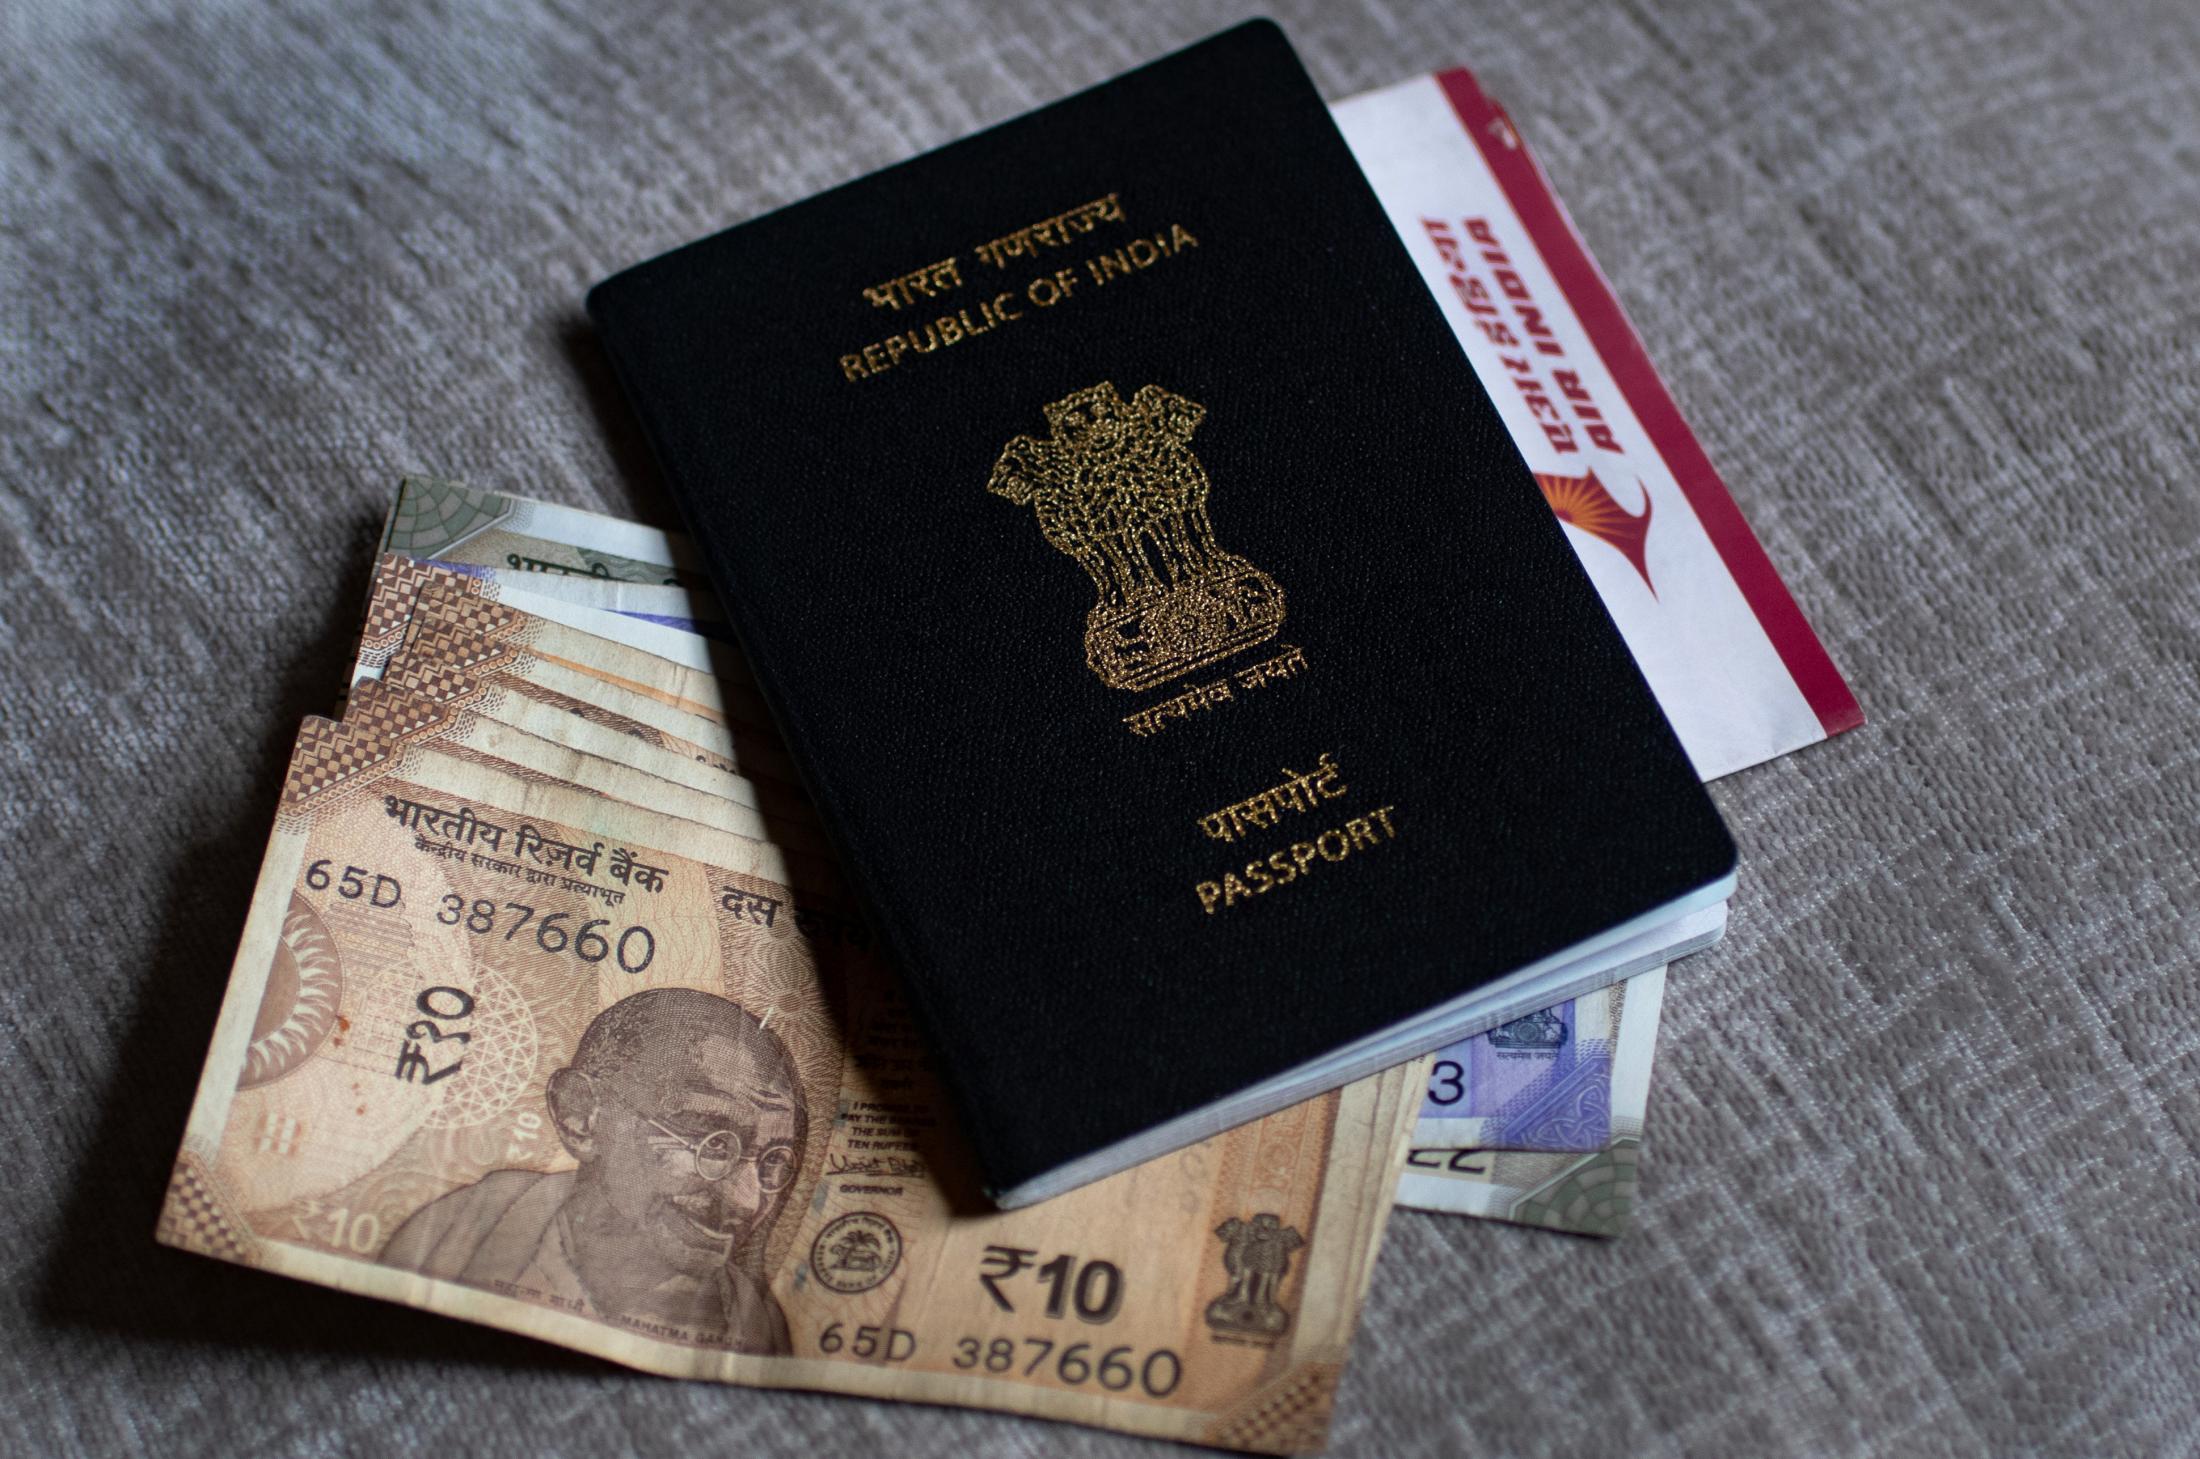  Passport, tickets, and my dreams all bundled in a suitcase, ready to start a new adventure. While unpacking, I found some Indian currency that sat unused&nbsp; in my backpack since the COVID-19 pandemic. Perhaps it was the change I received for the ice cream I had a long time ago. 